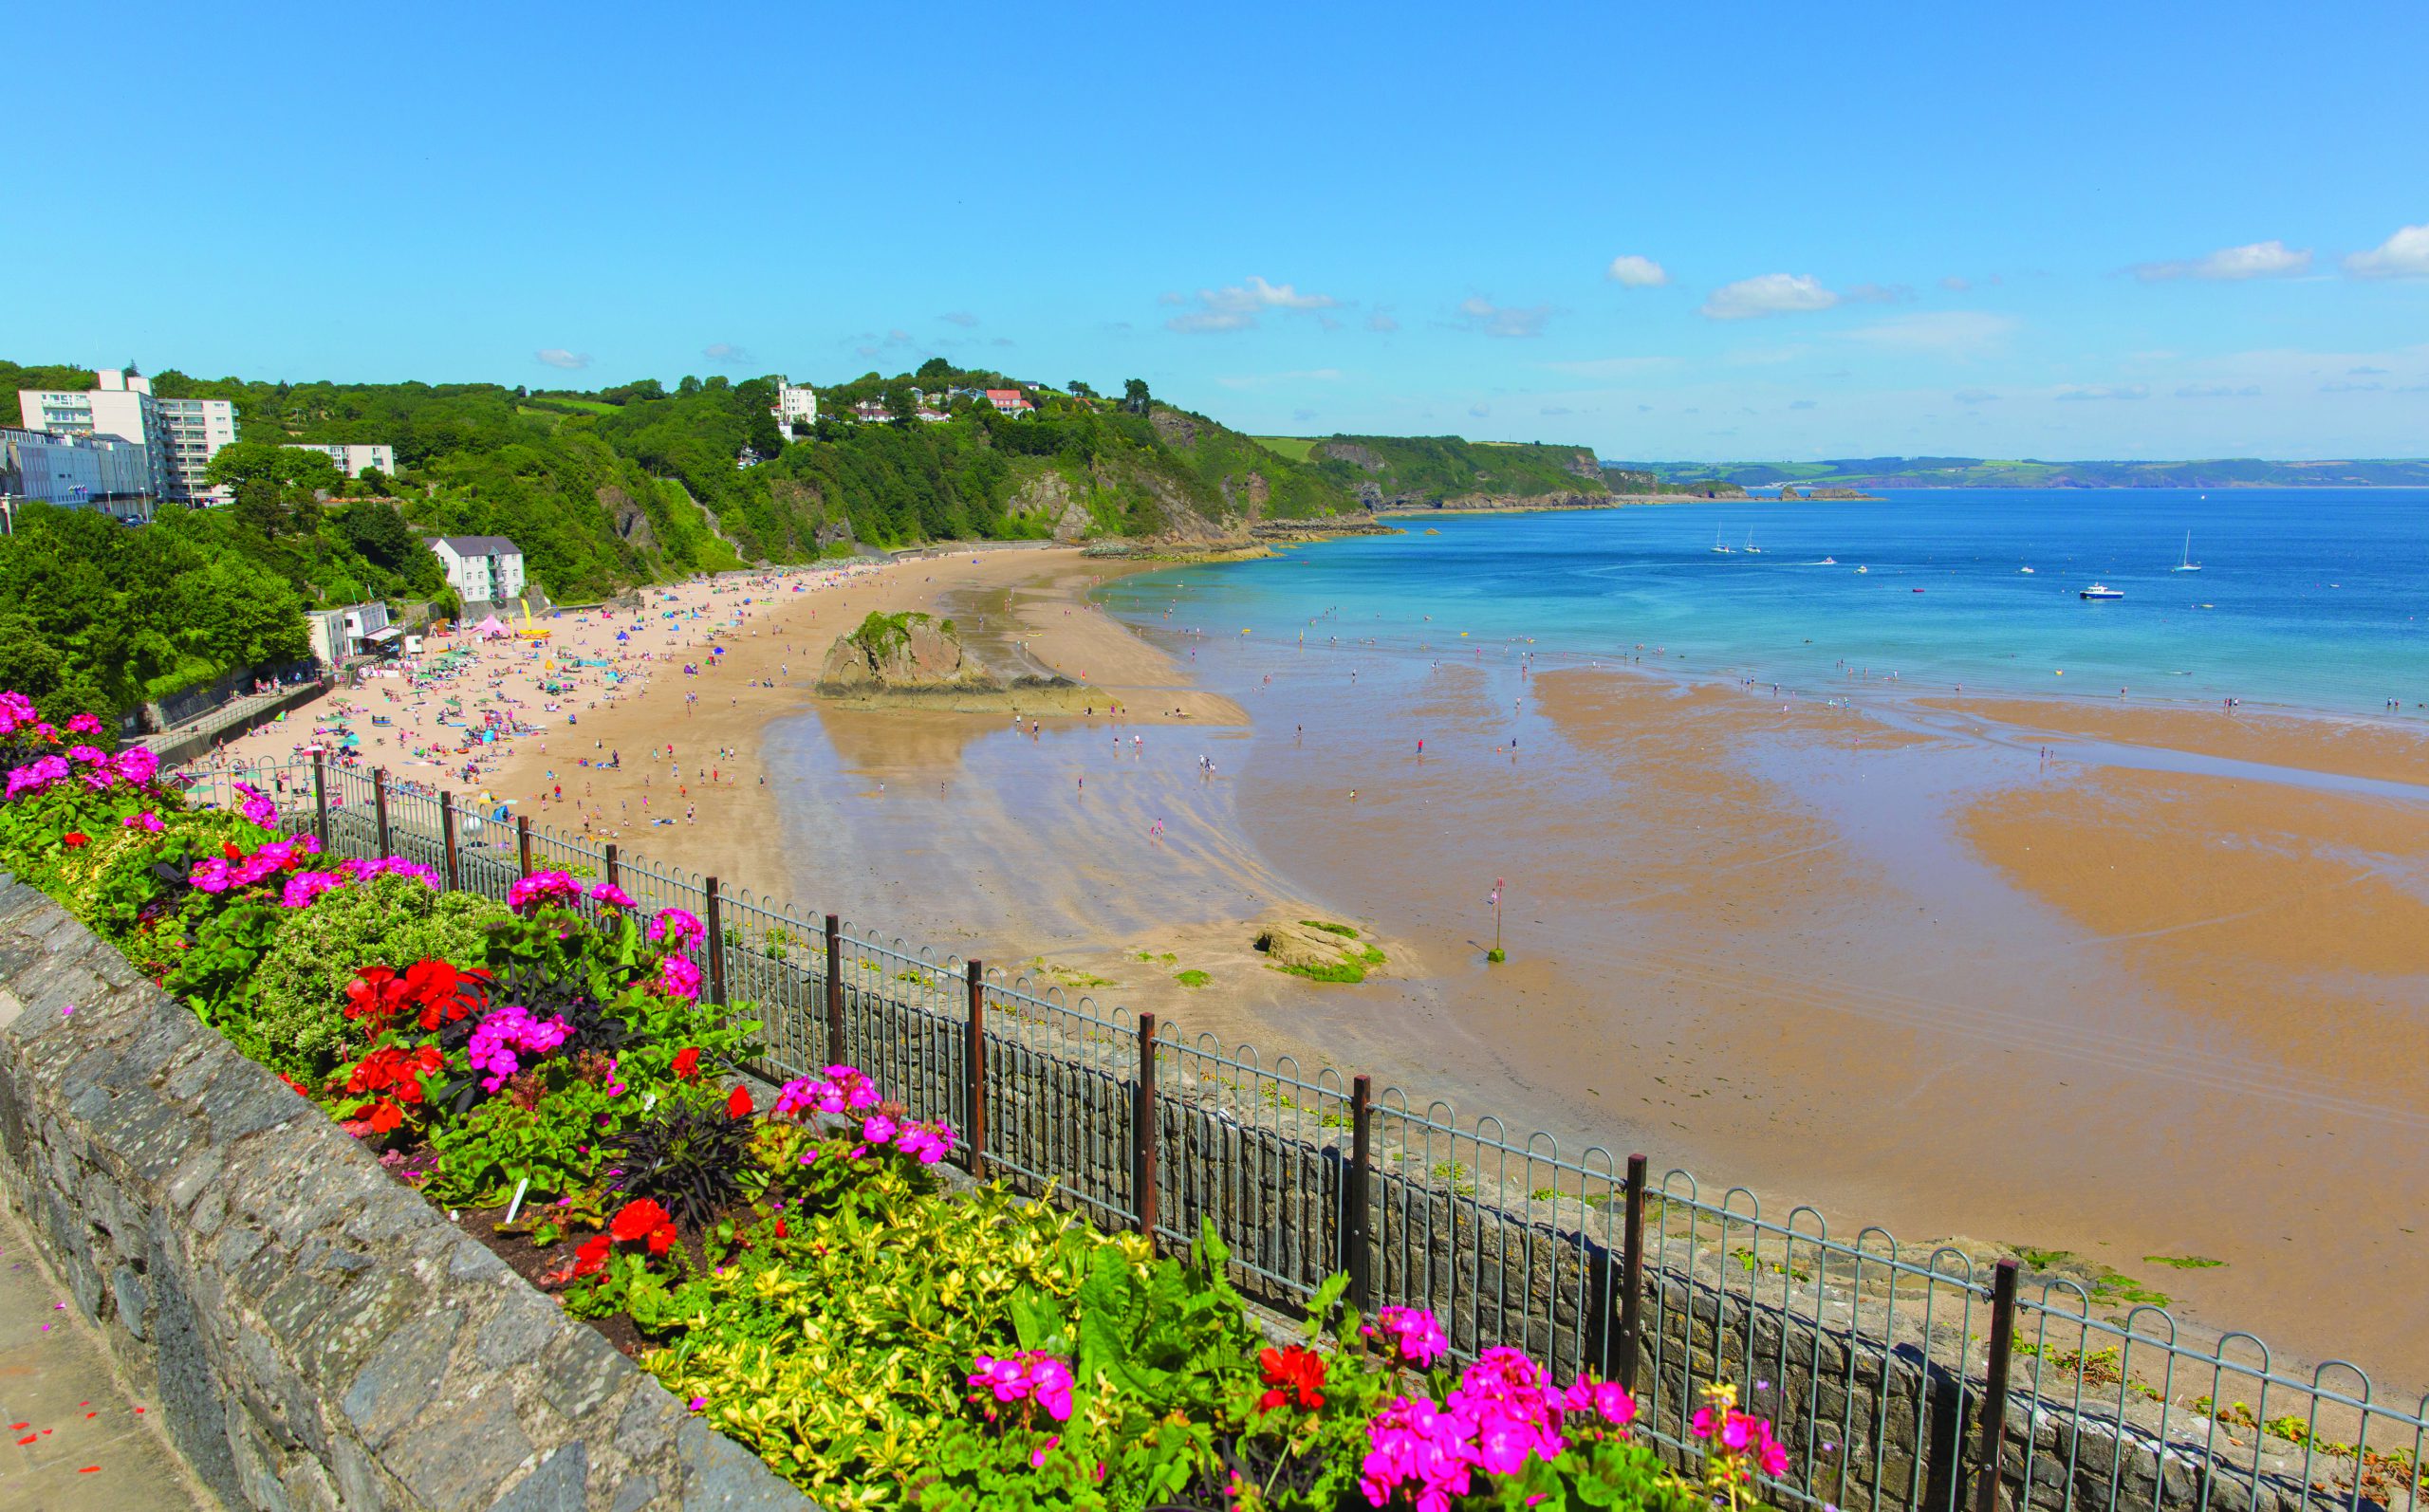 Coach Holidays to tenby